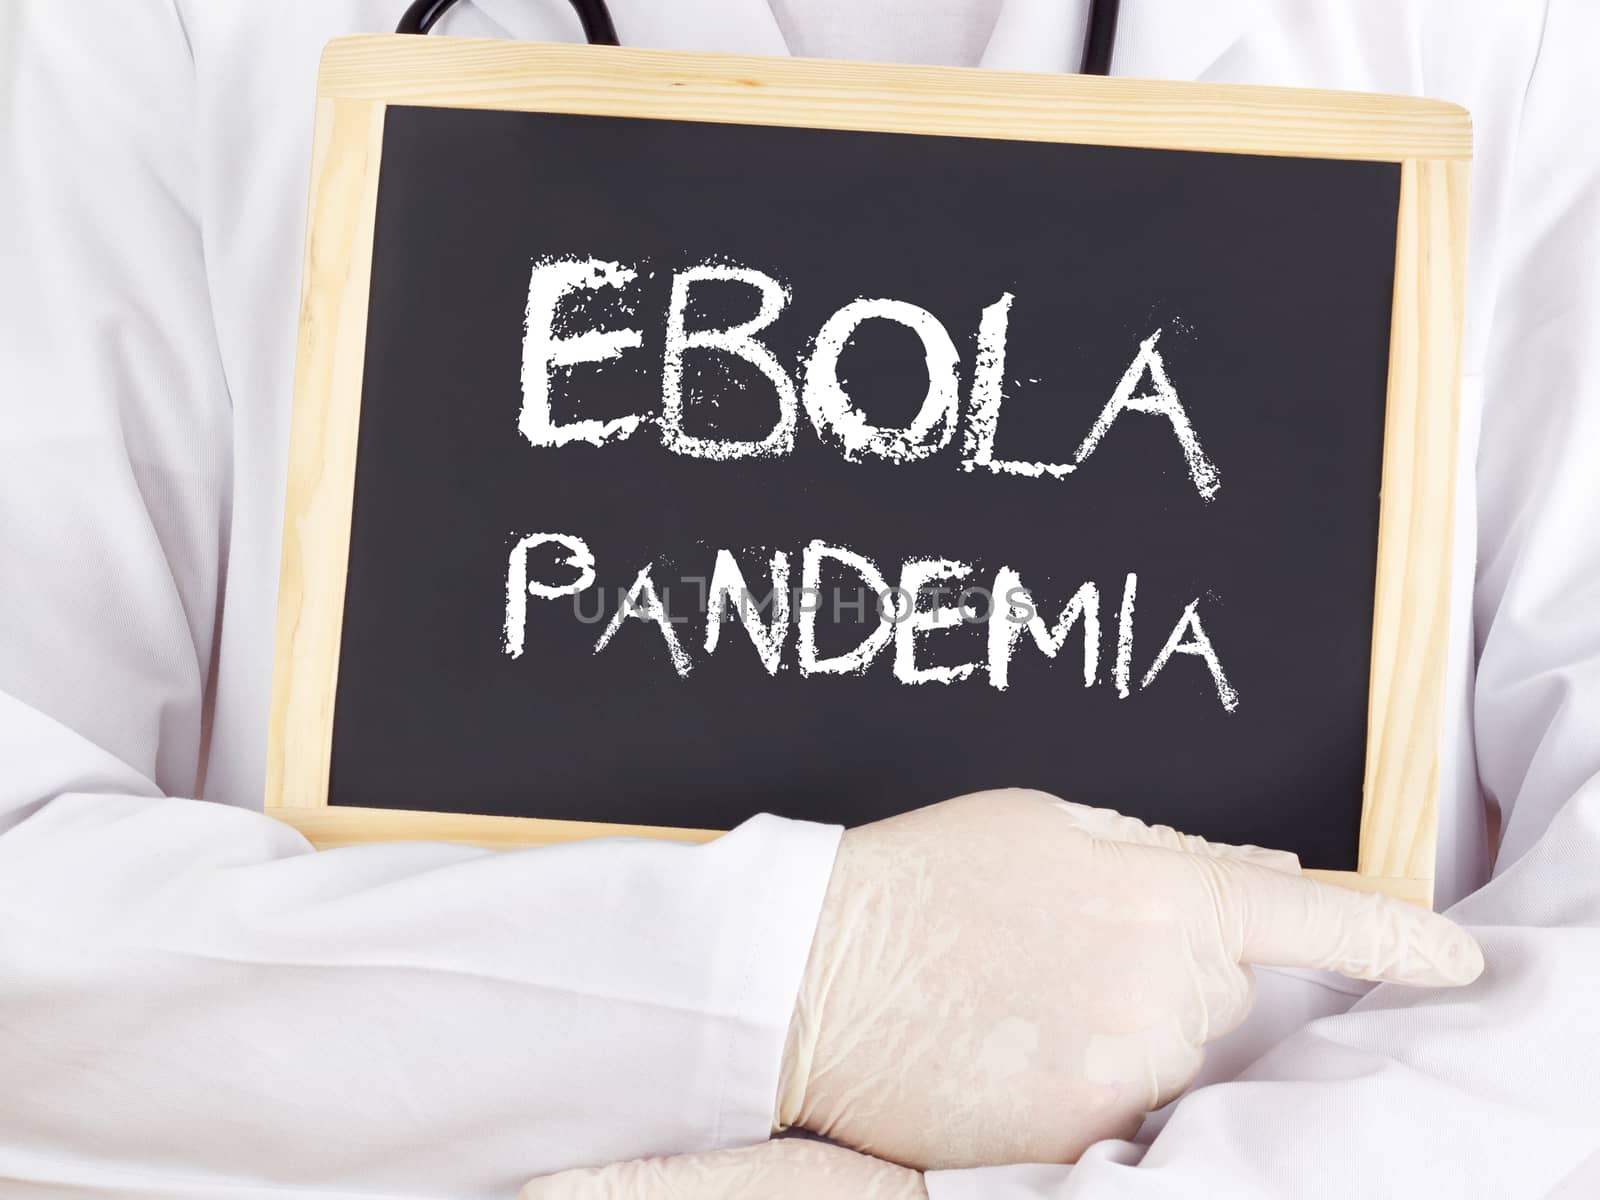 Doctor shows information: Ebola pandemia